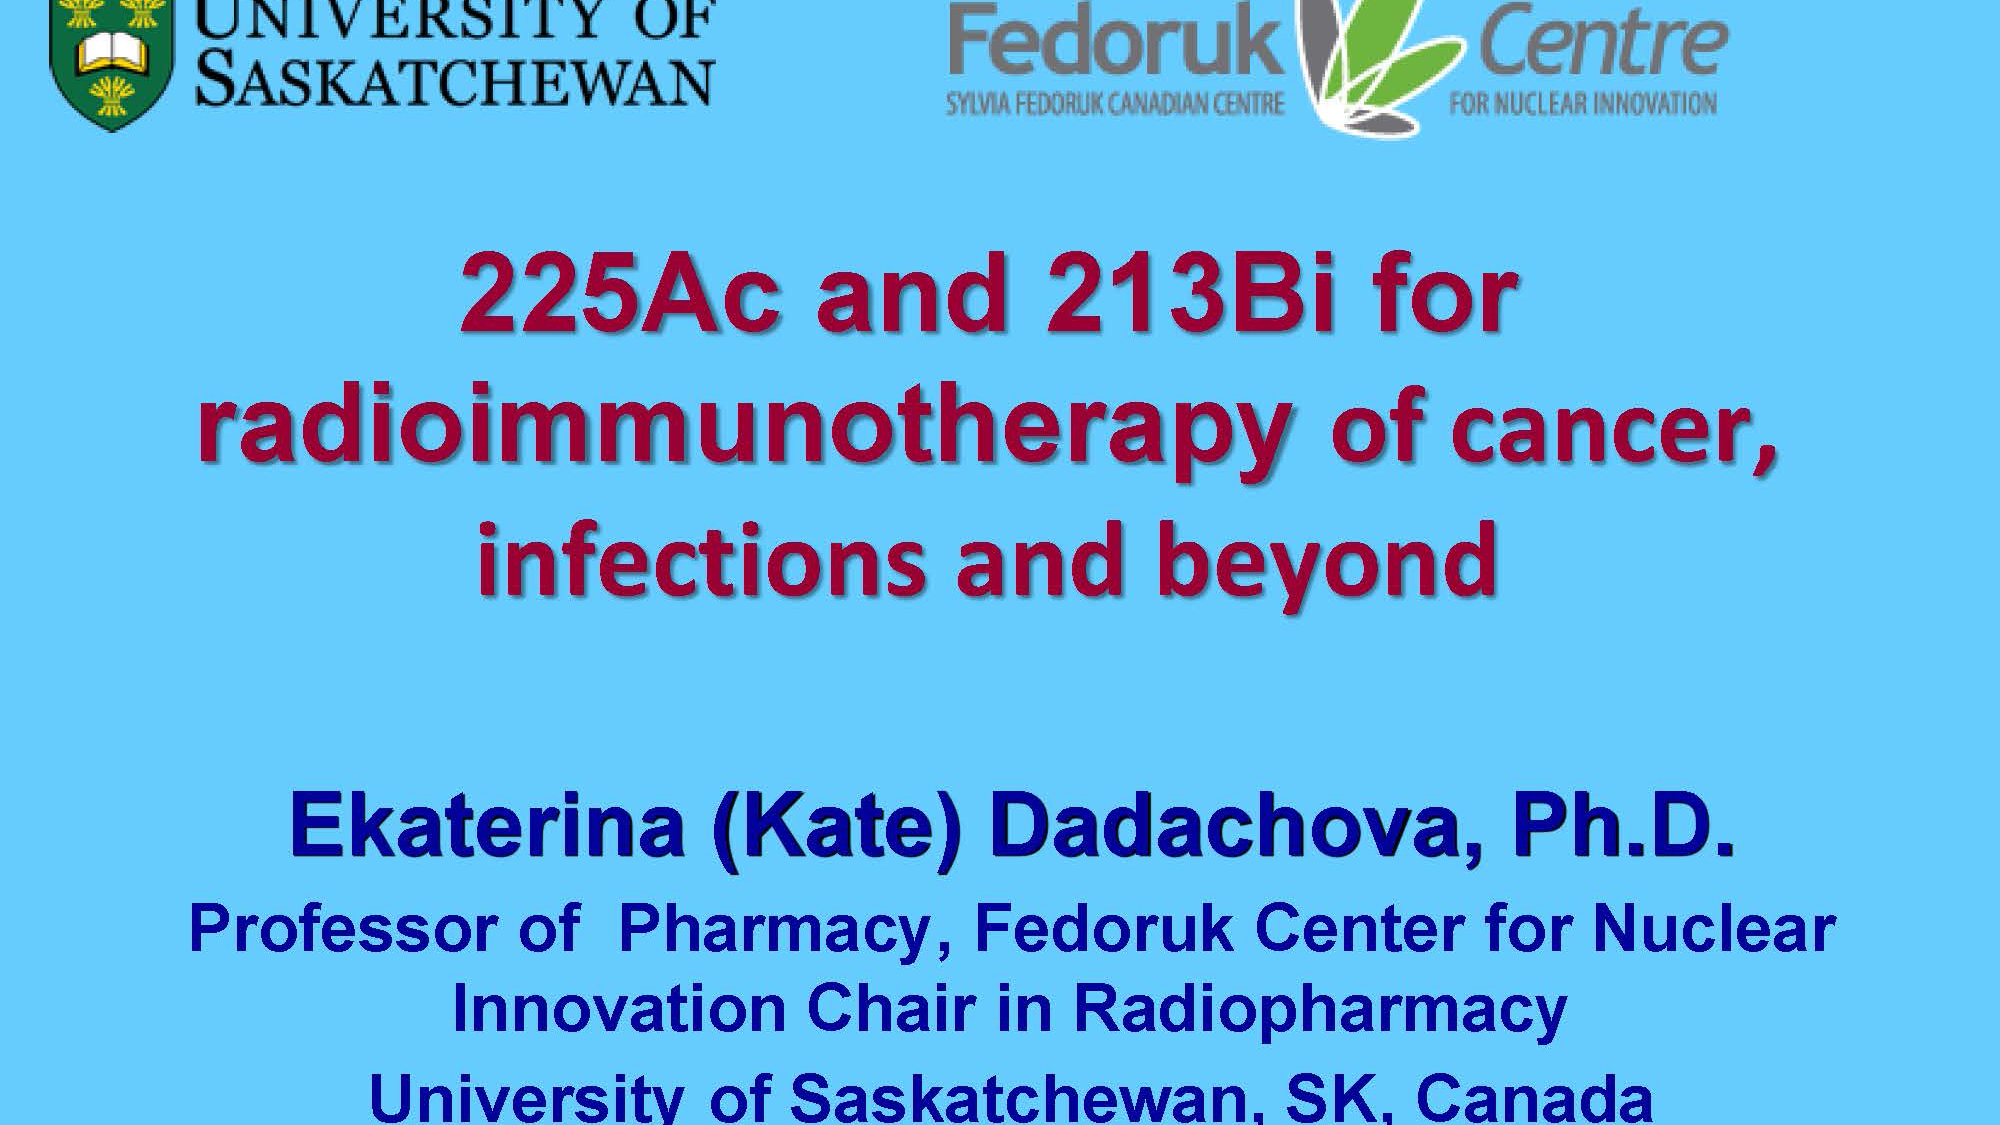 Ac-225 and B-213 for Radioimmunotherapy of Cancer, Infections, and Beyond by Dr. Ekaterina Dadachova, University of Saskatchewan